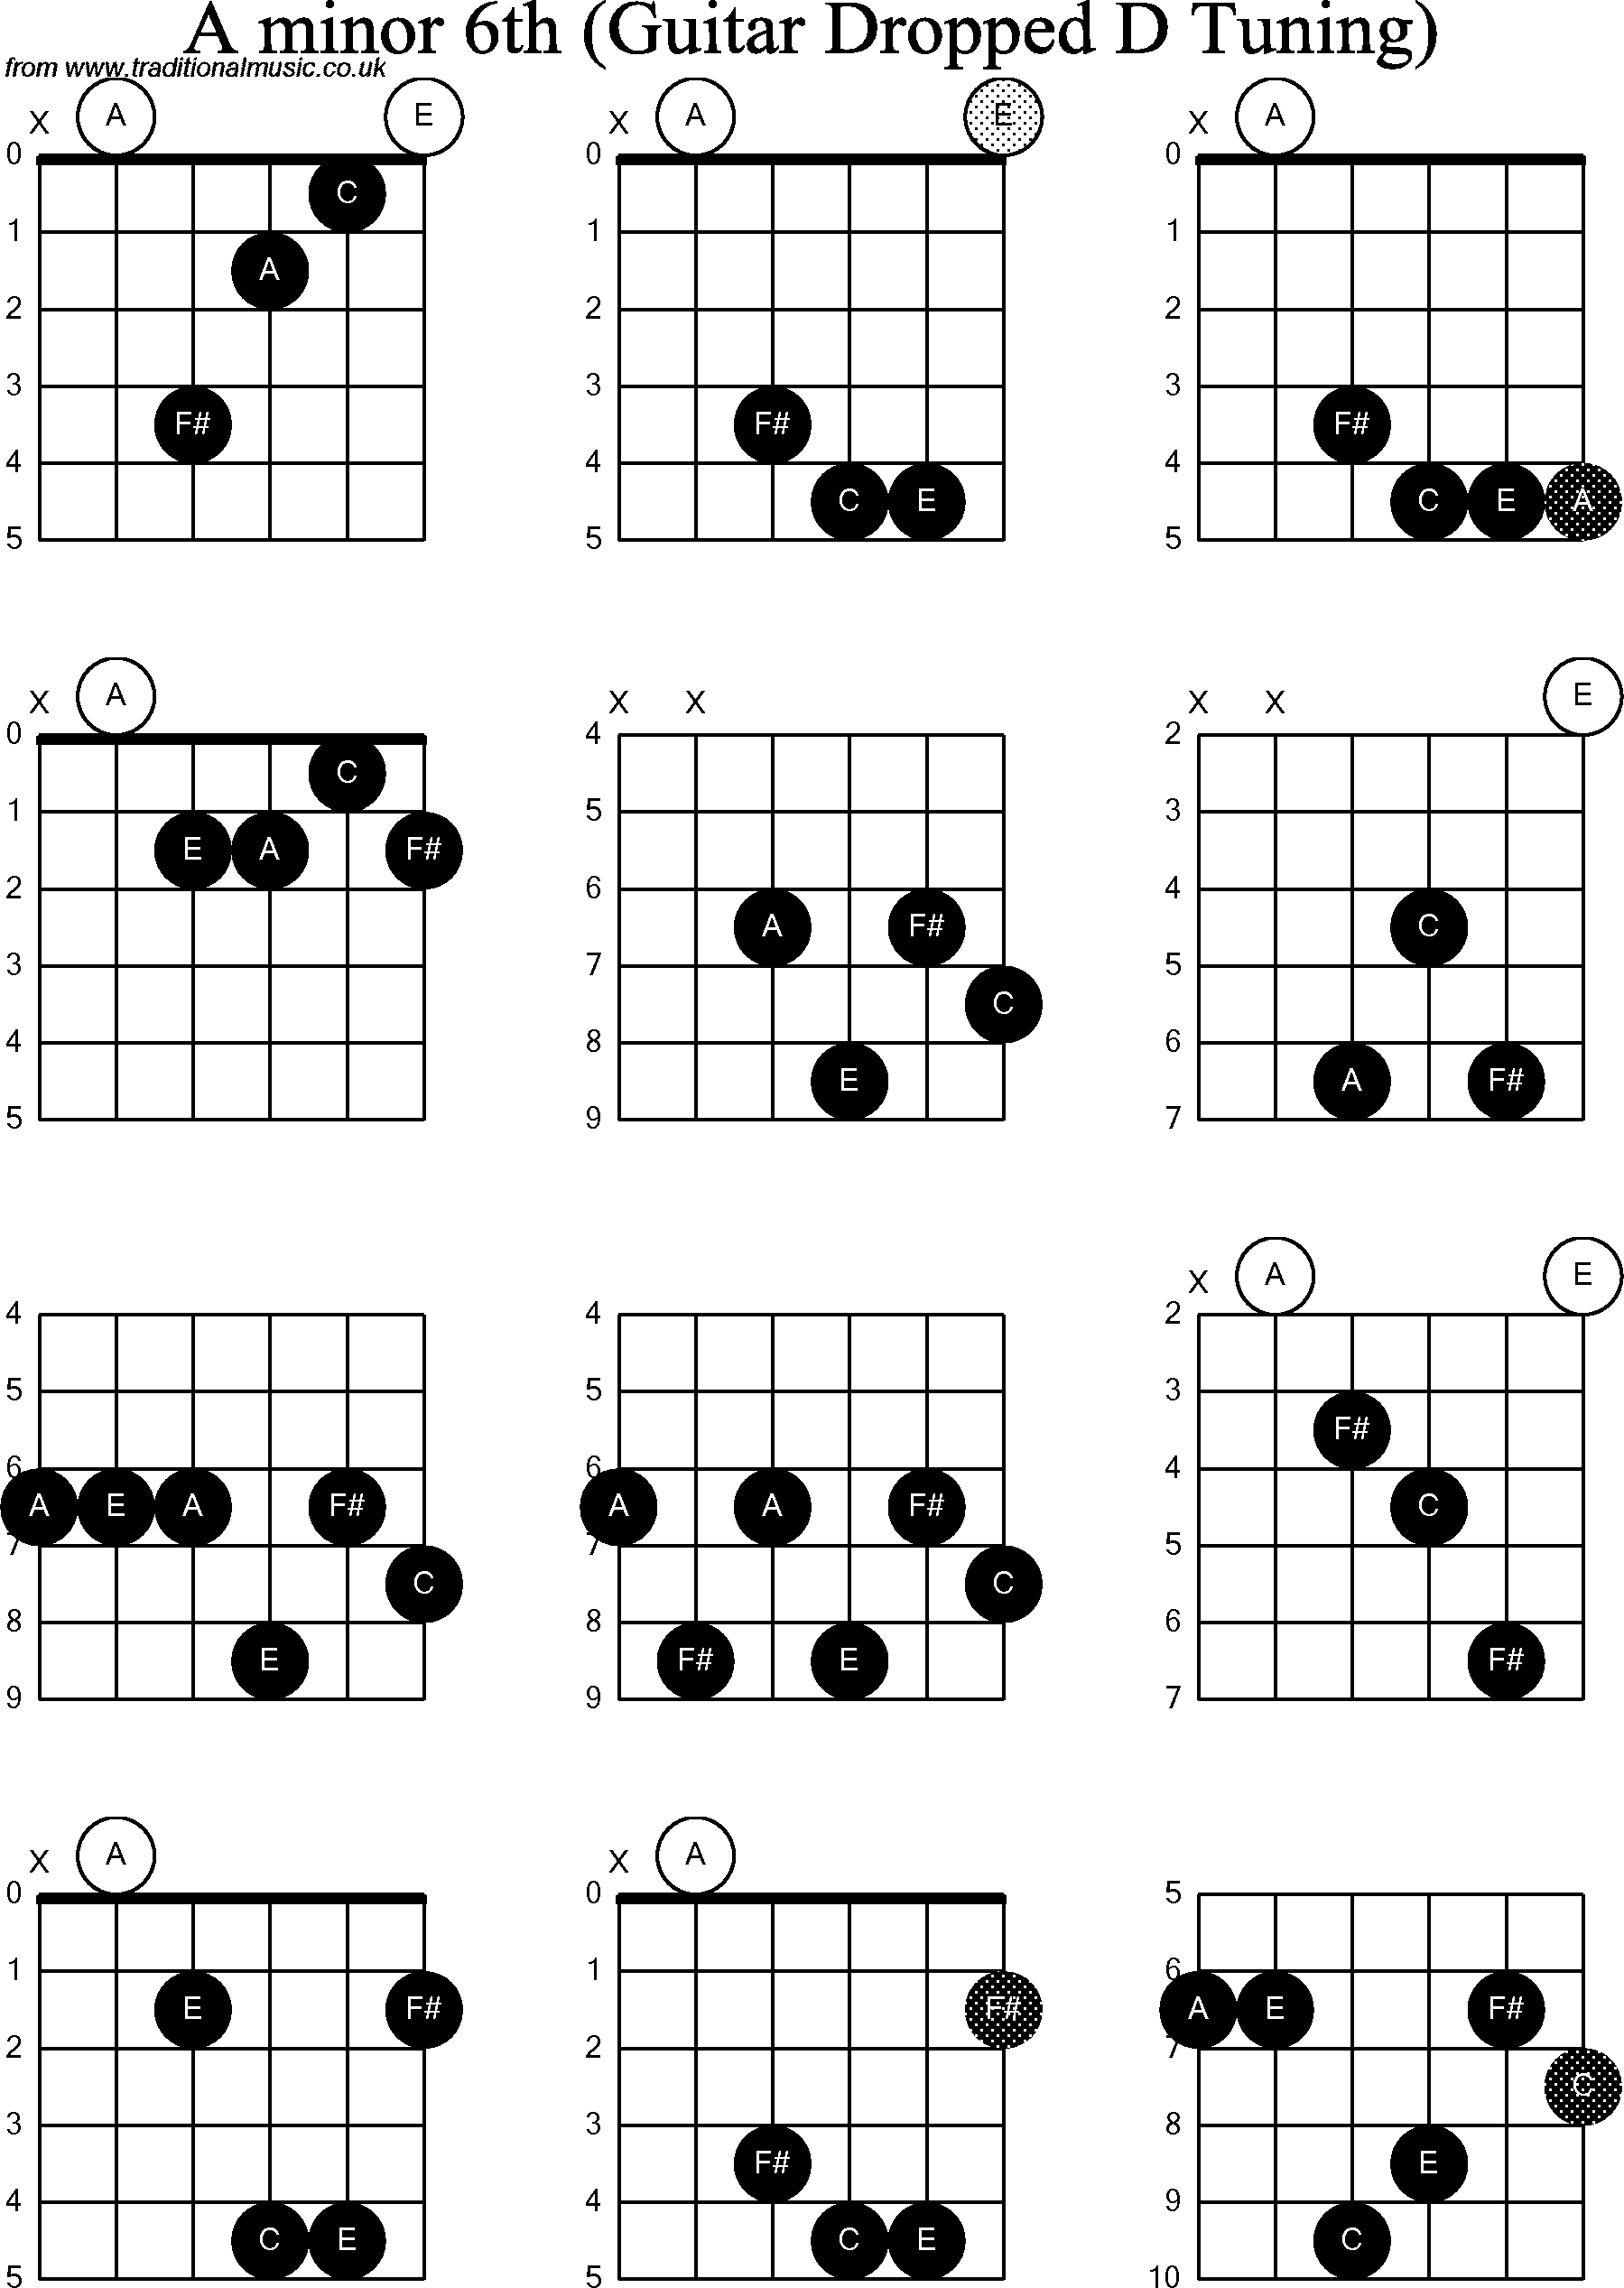 Chord diagrams for dropped D Guitar(DADGBE), A Minor6th